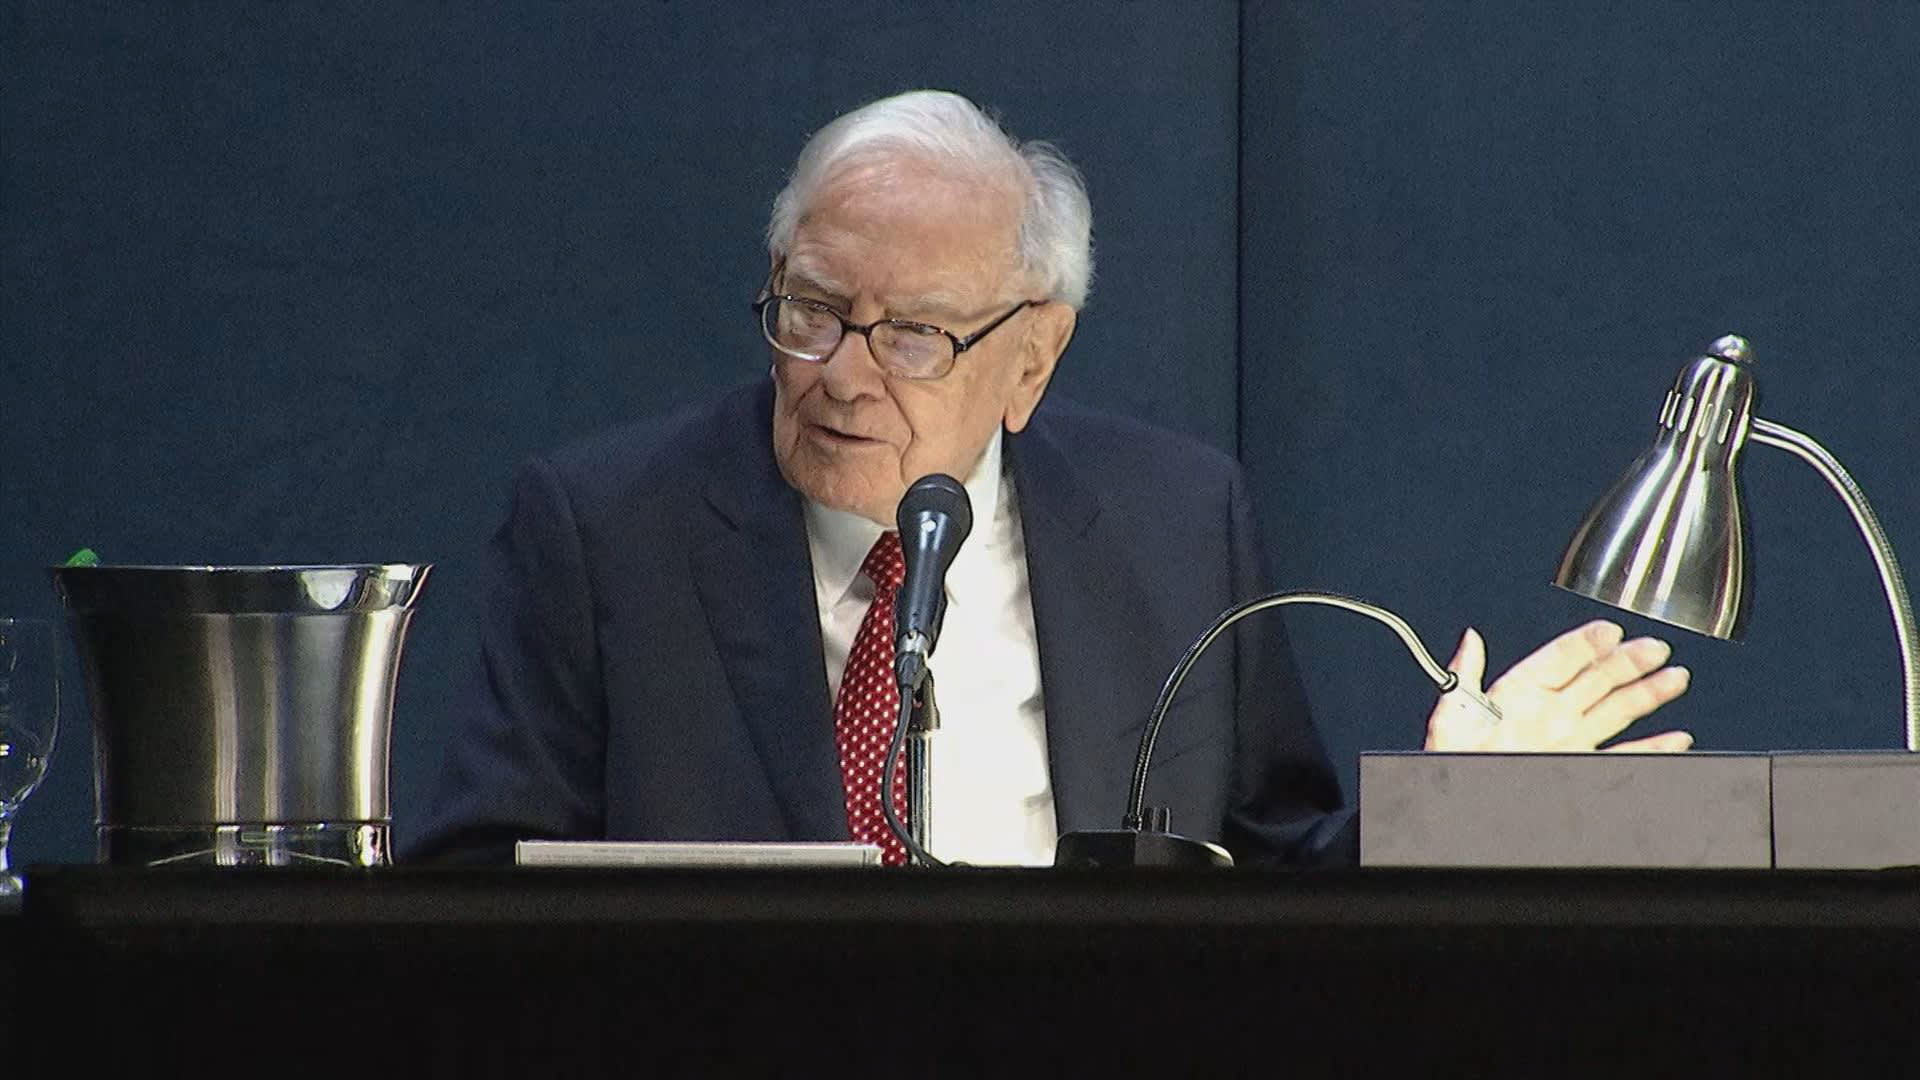 Warren Buffett weighs in on his own mortality at this year's Berkshire Hathaway annual meeting